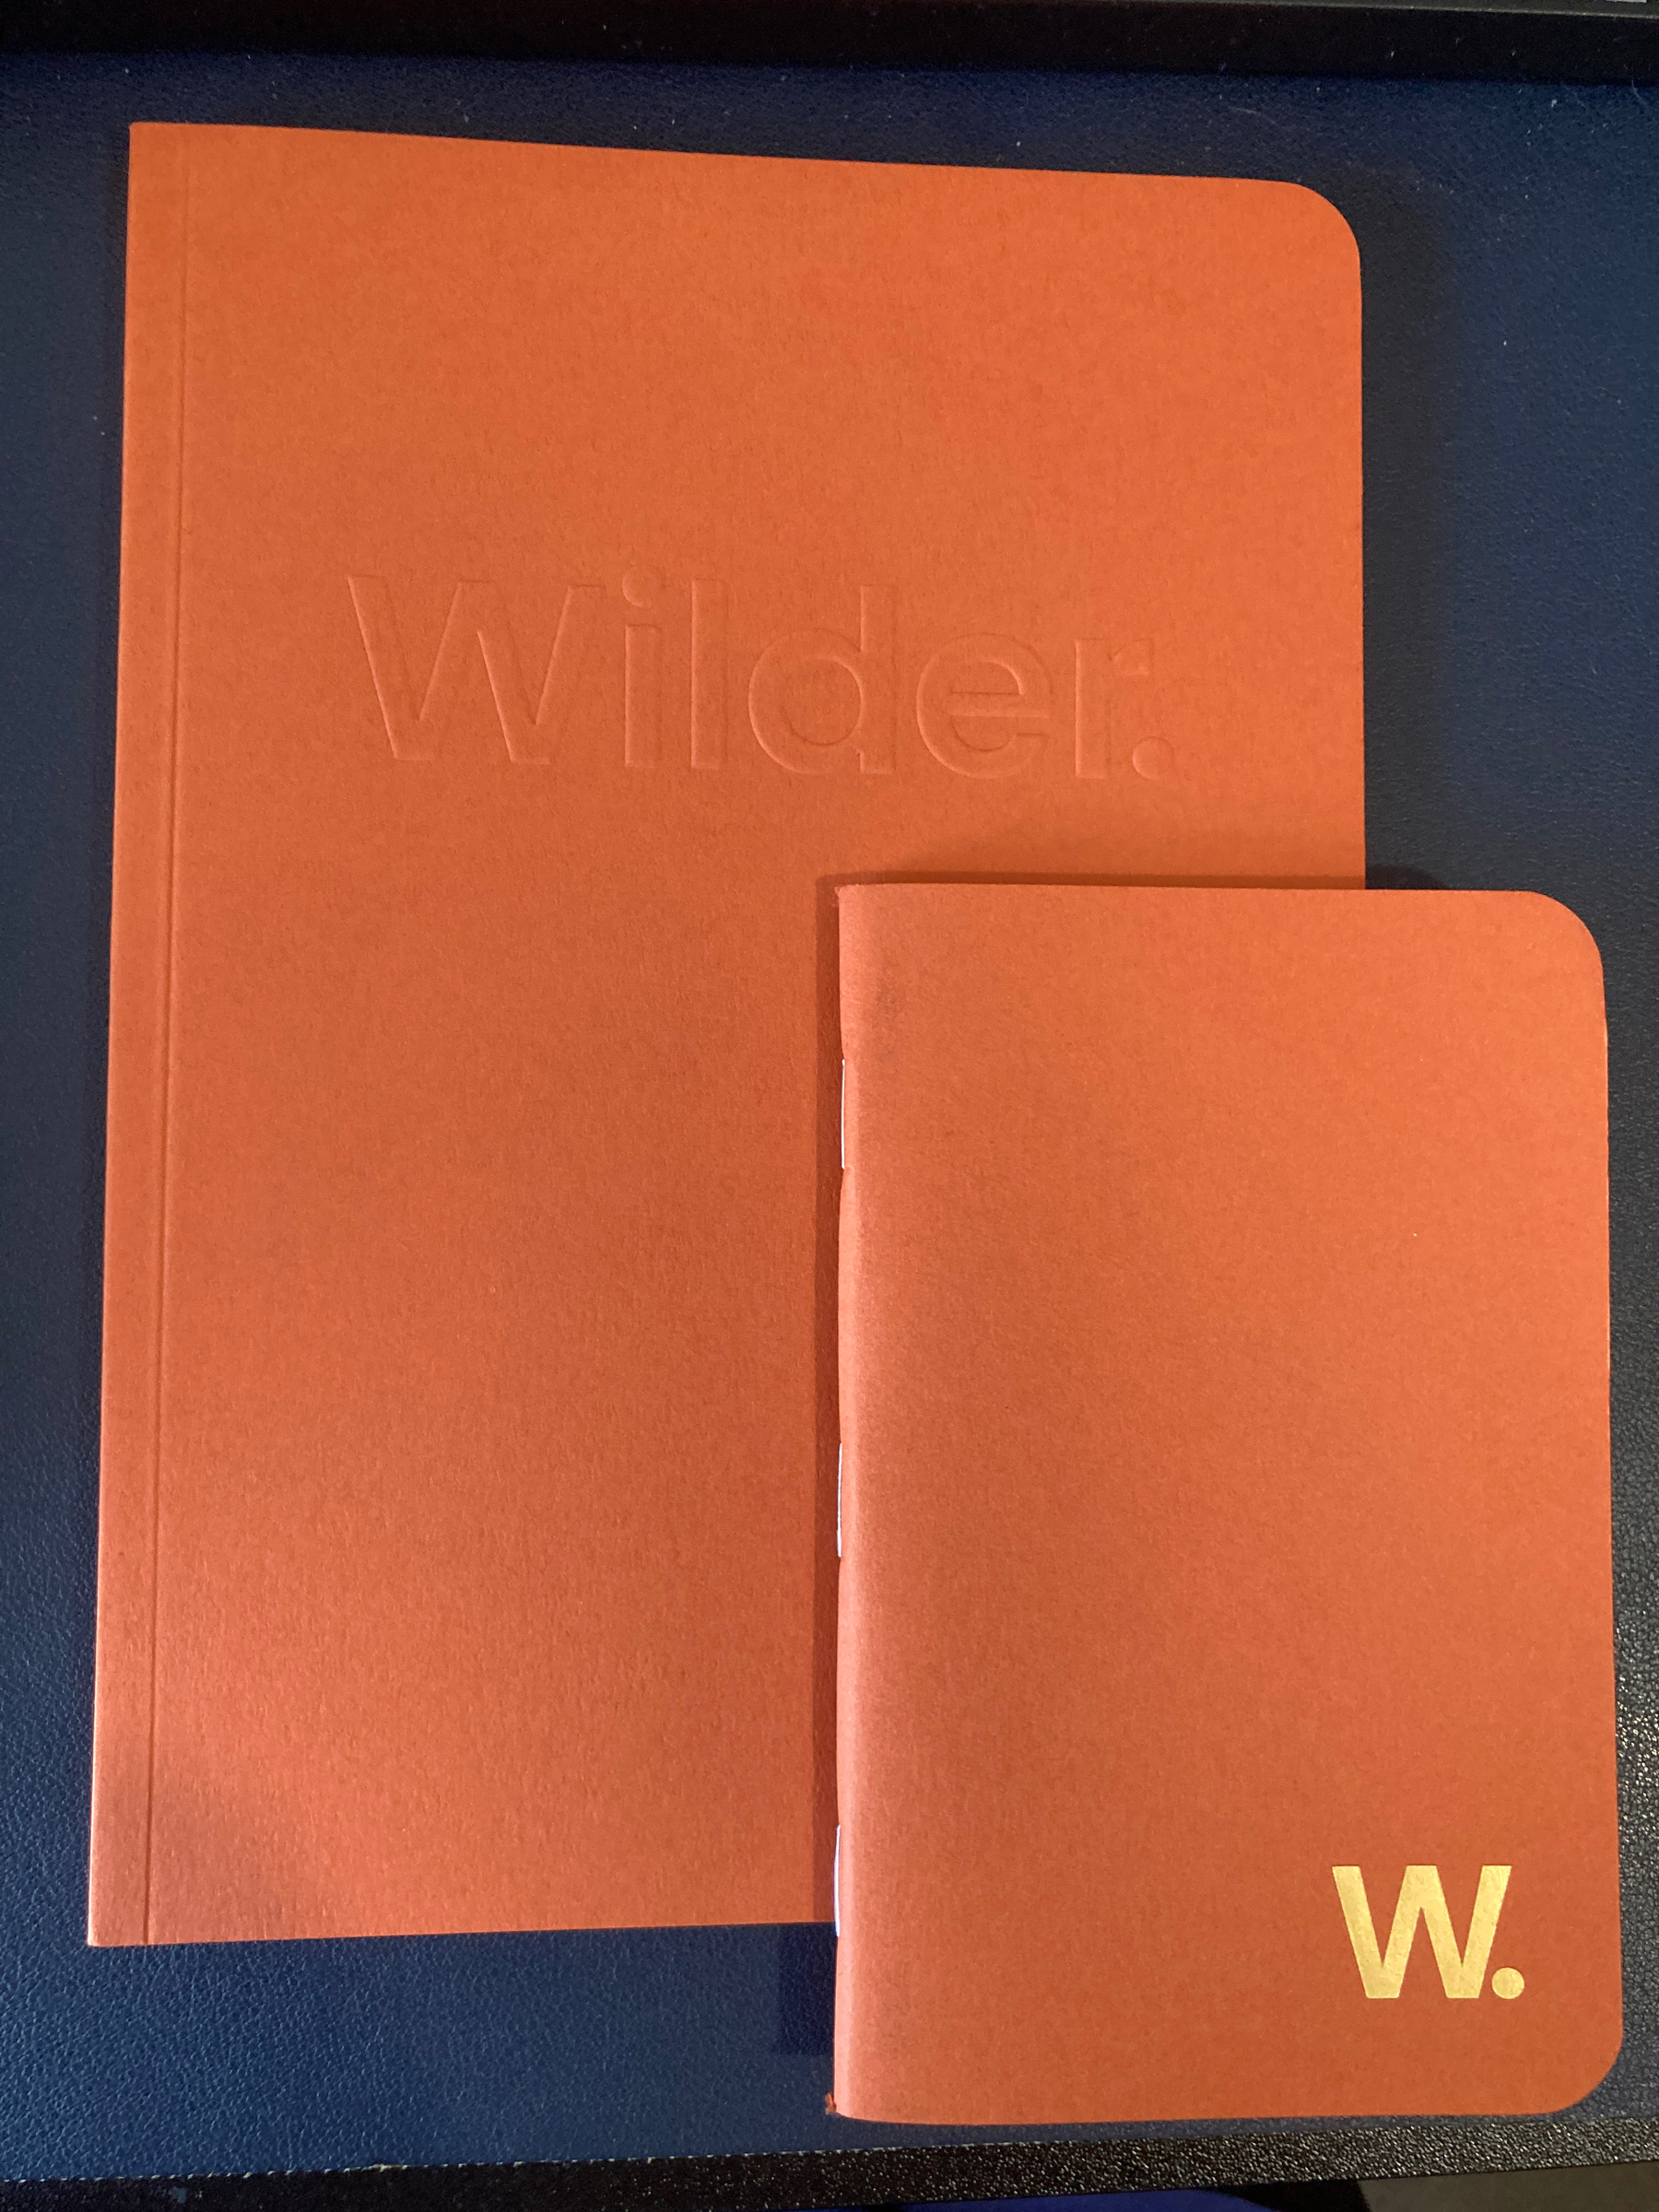 Top-down view of two orange Wilder notebooks on a desk, one smaller sitting partly atop the other.